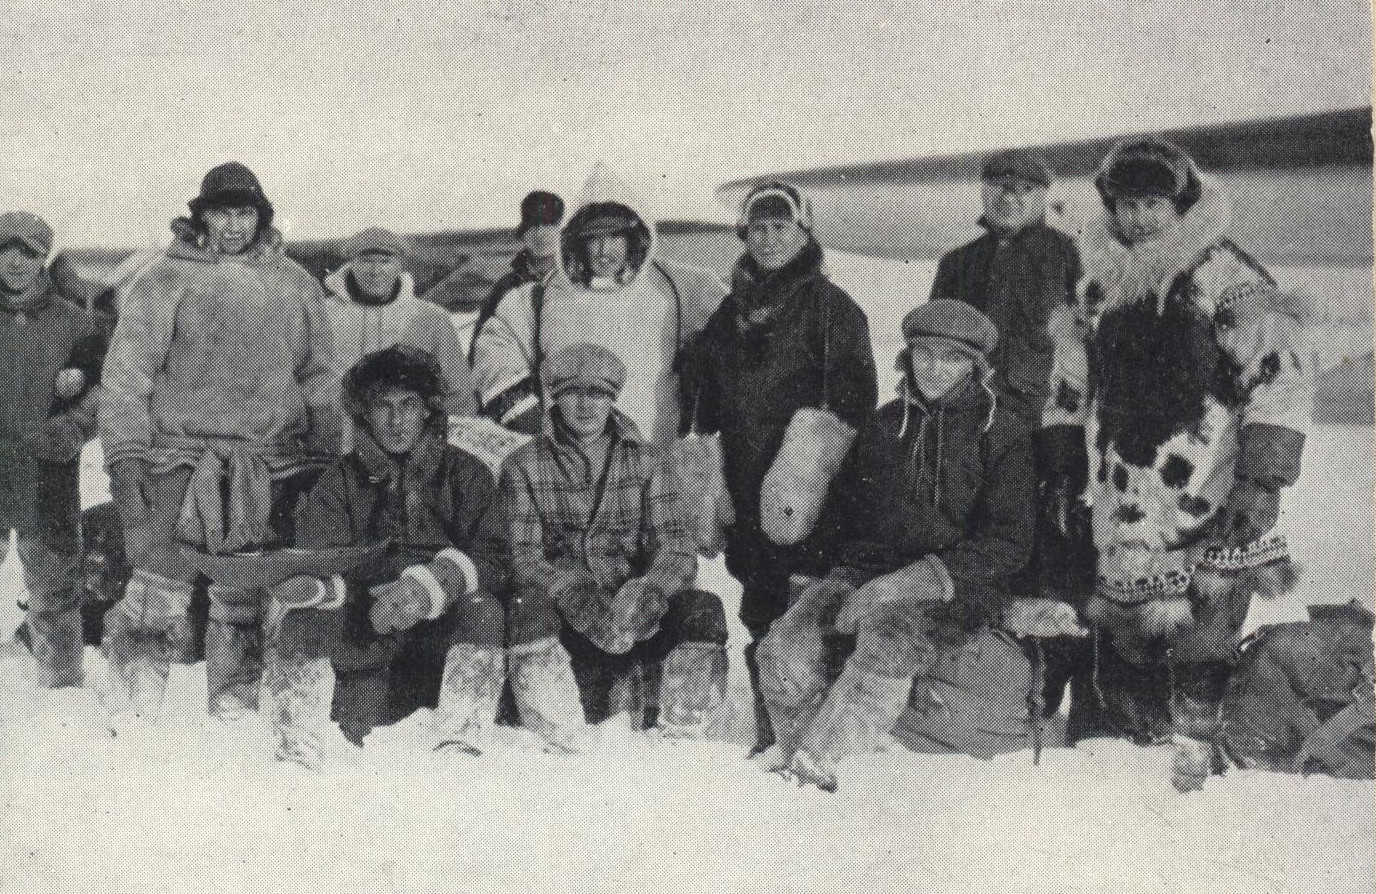 Group of men in winter clothing